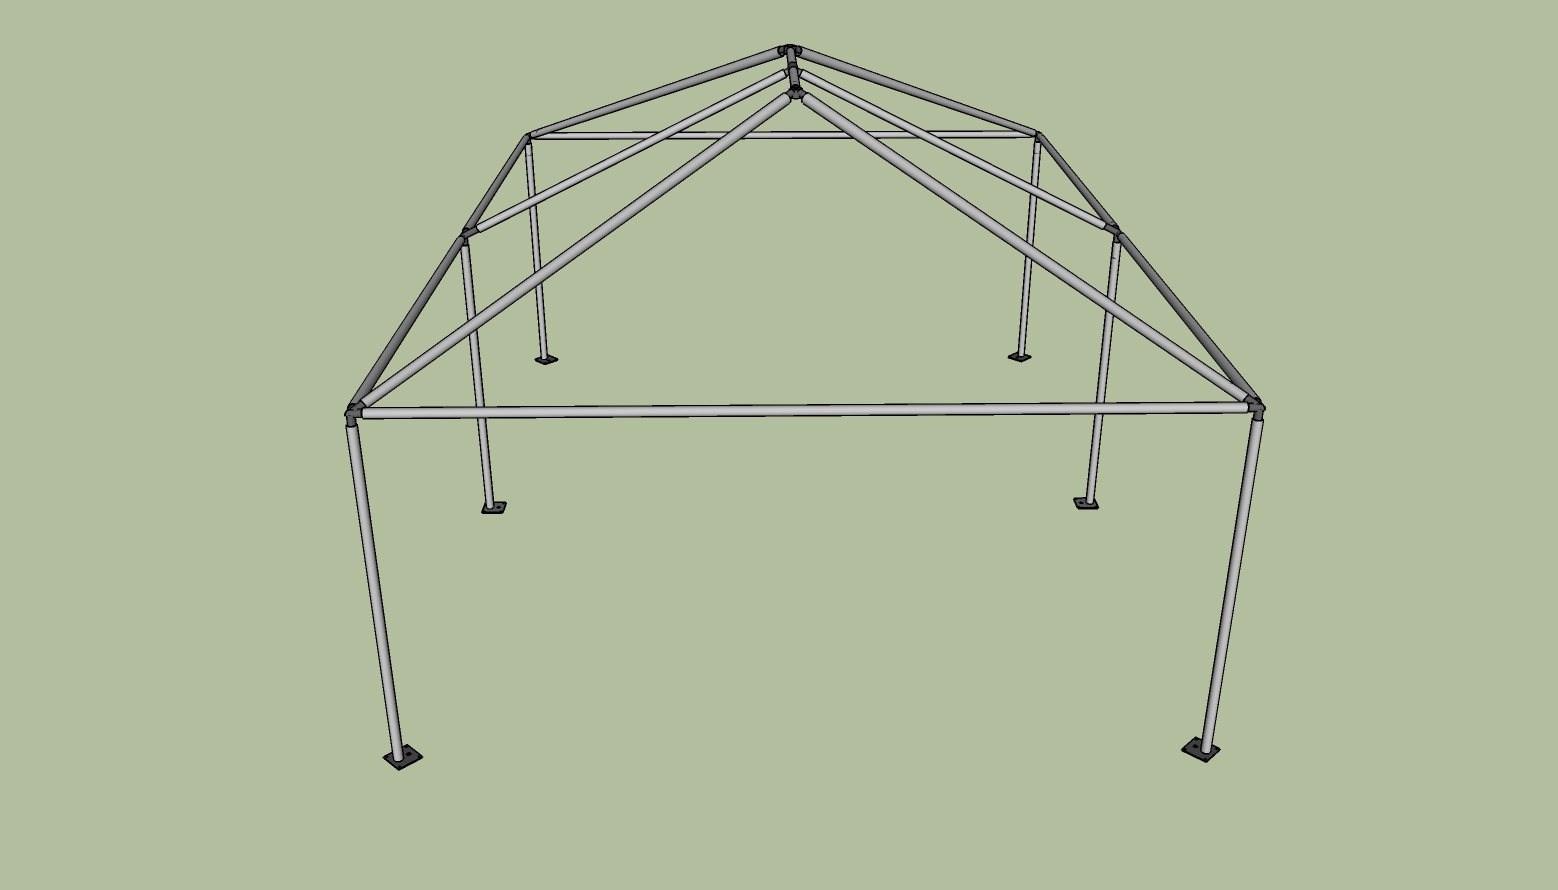 15x20 frame tent side view